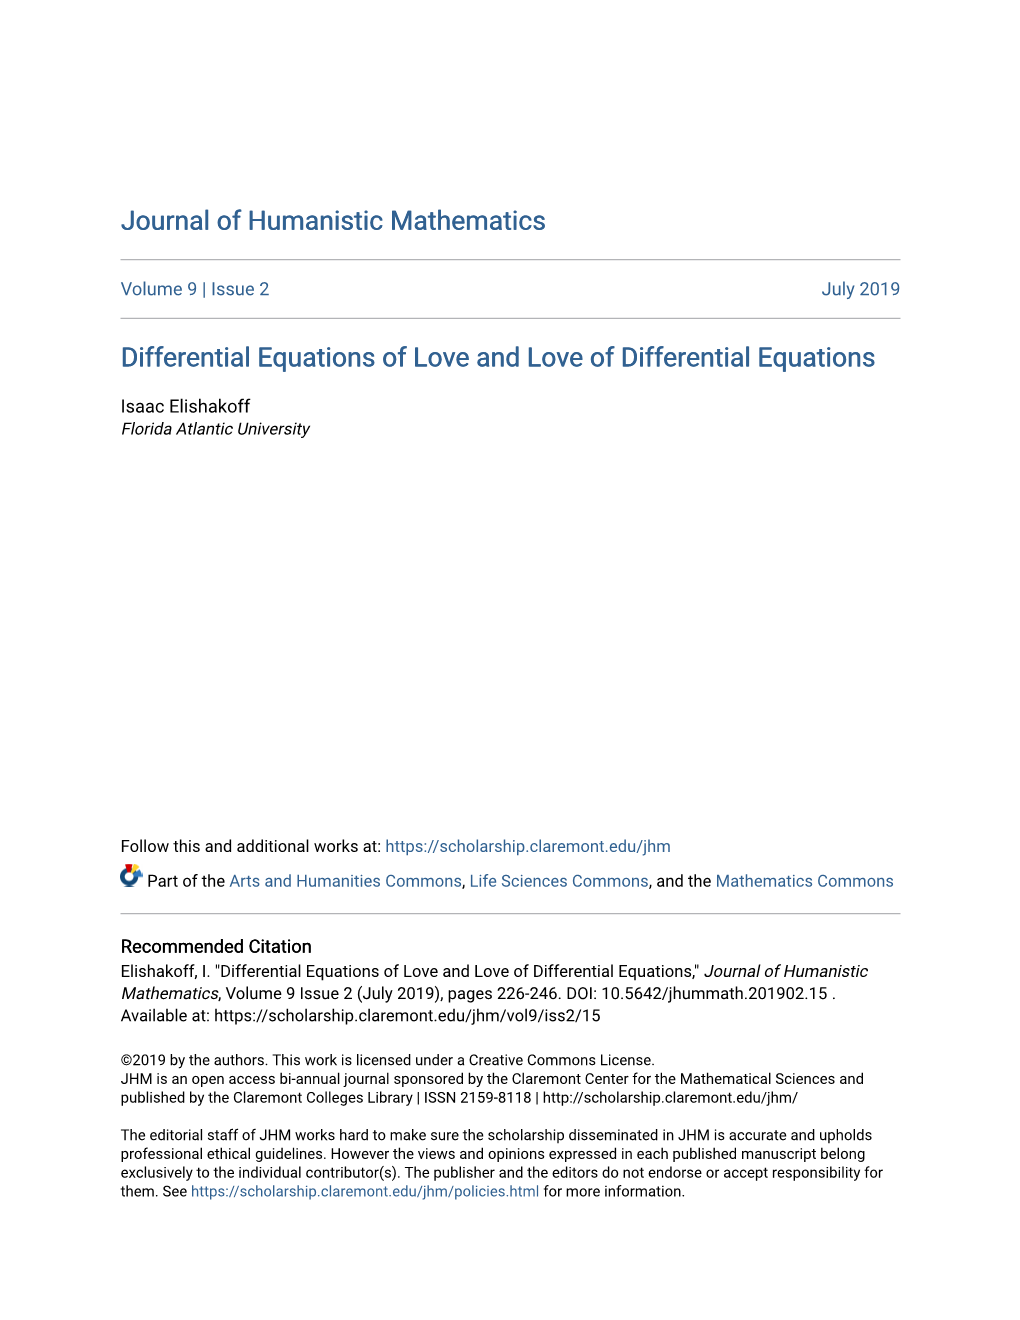 Differential Equations of Love and Love of Differential Equations